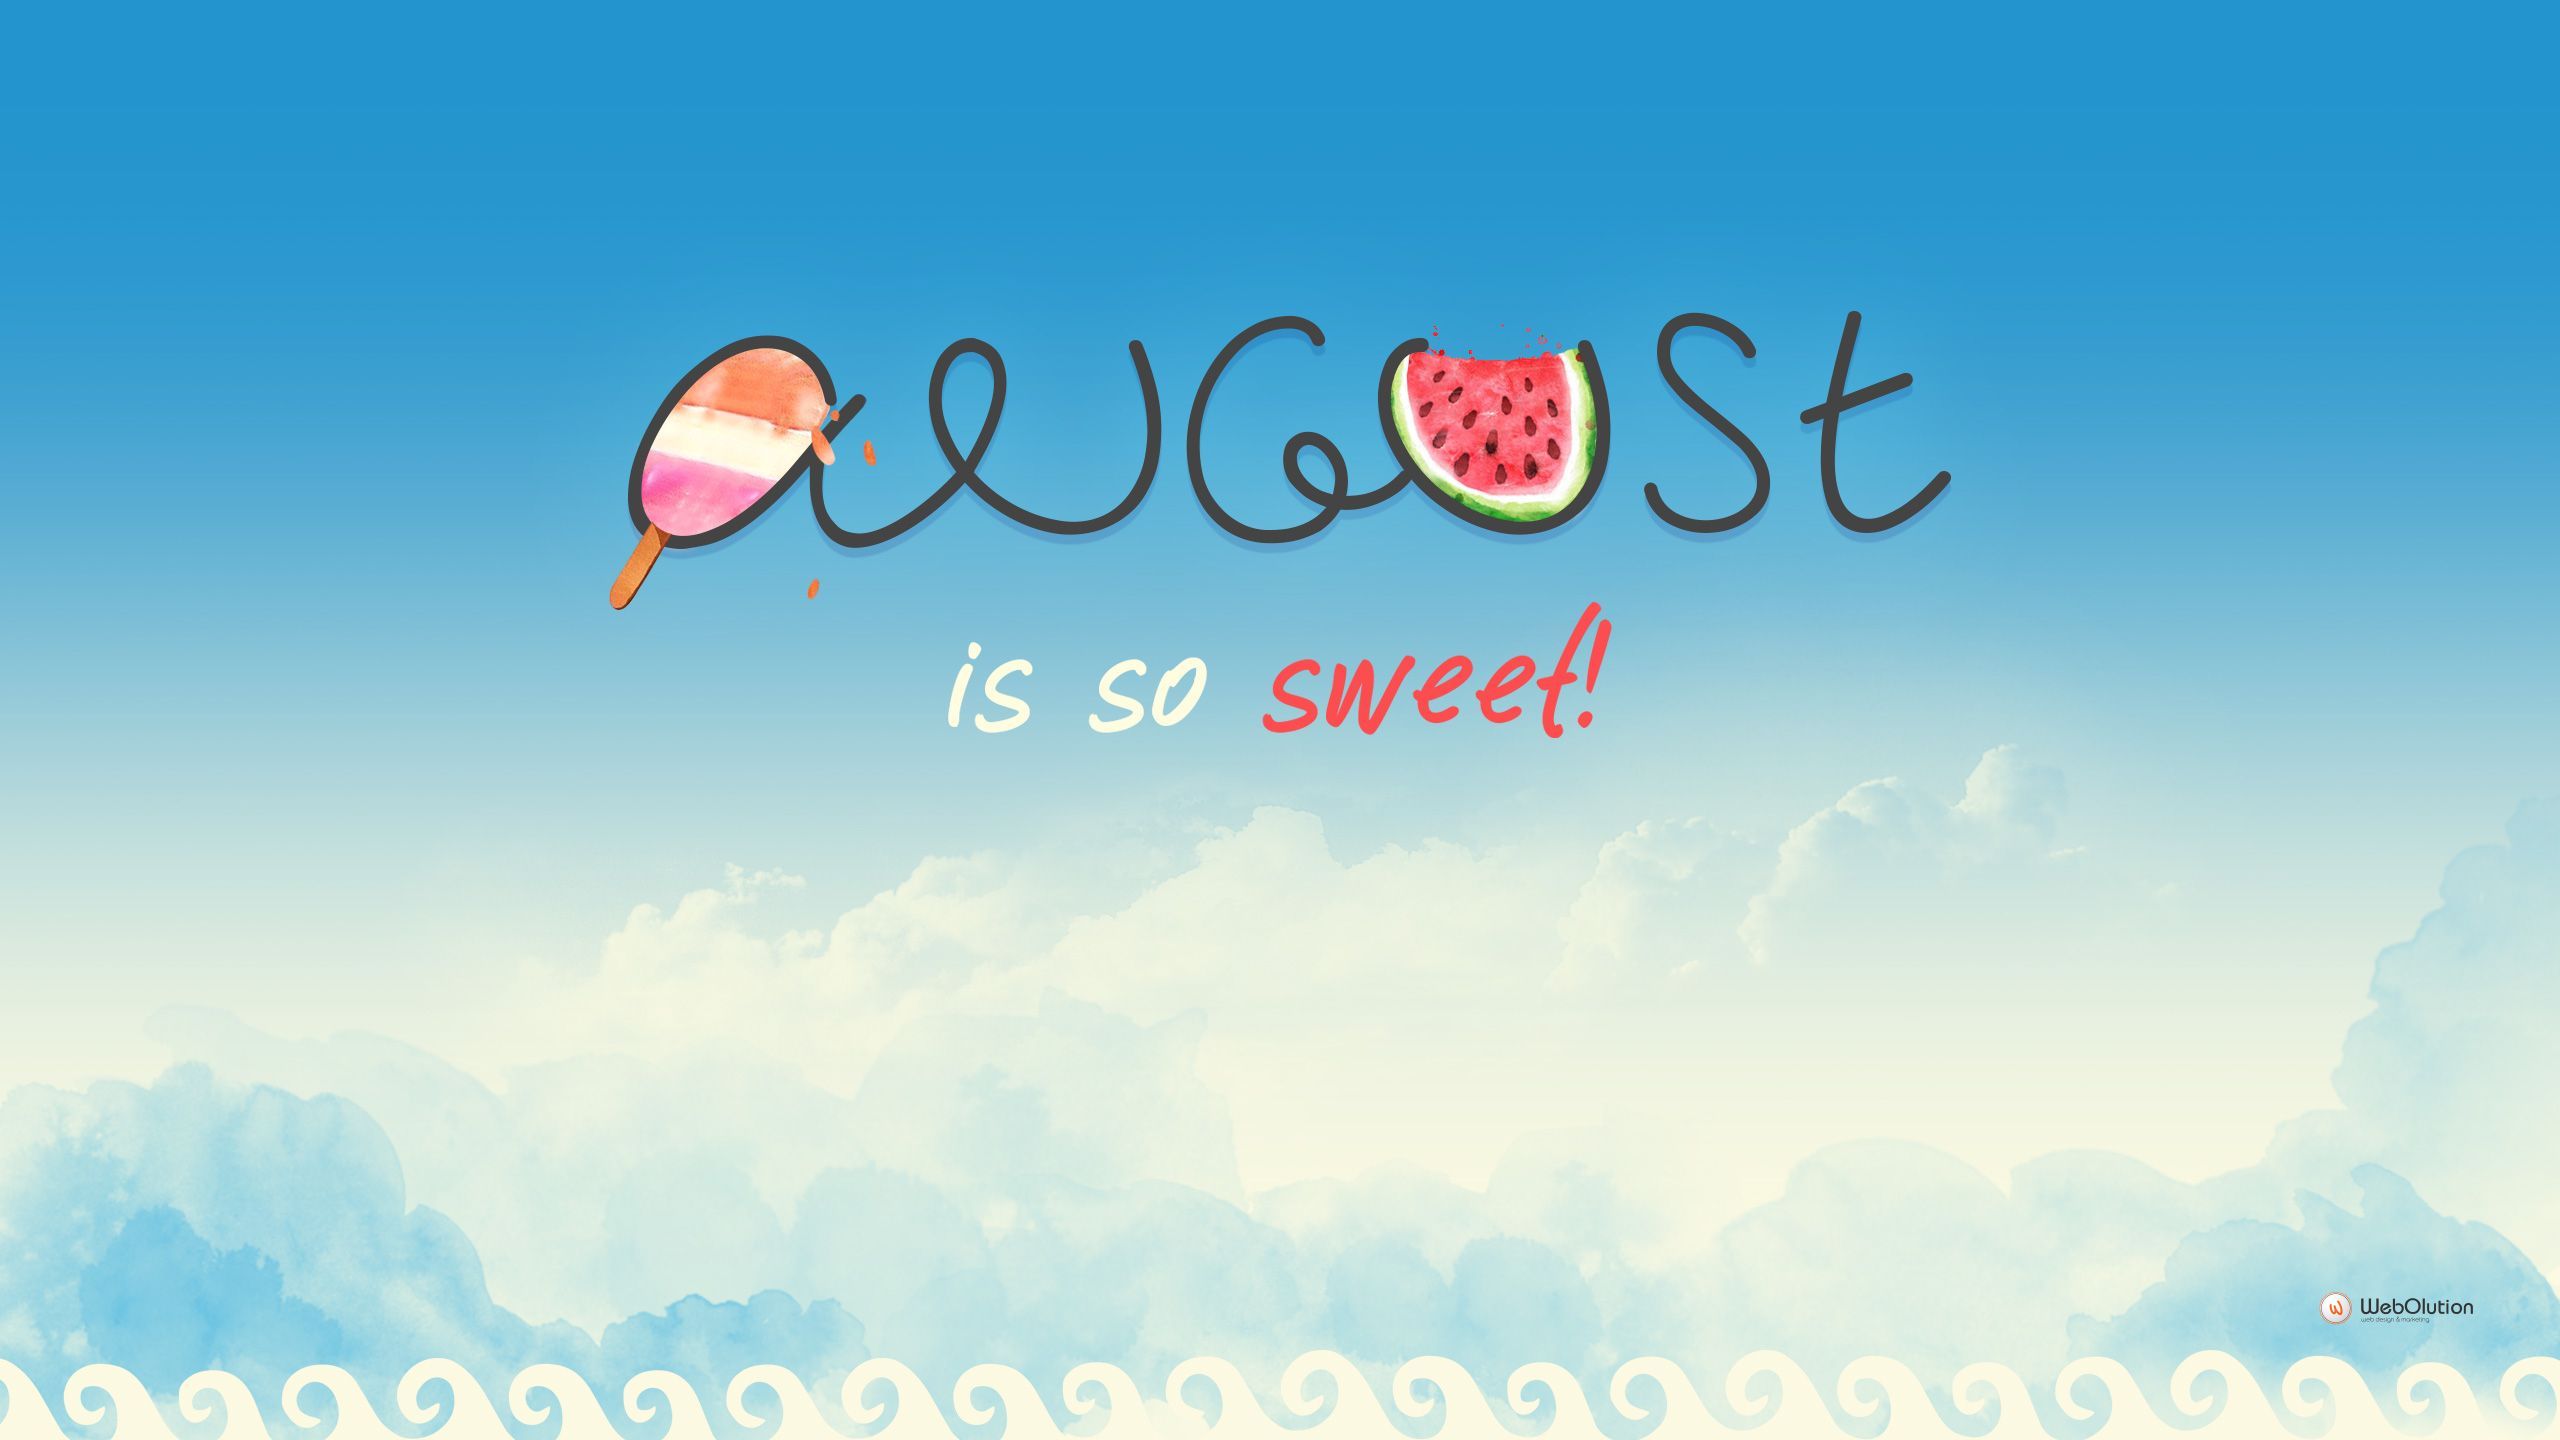 August wallpaper with ice cream and watermelon, blue sky and clouds in the background - August